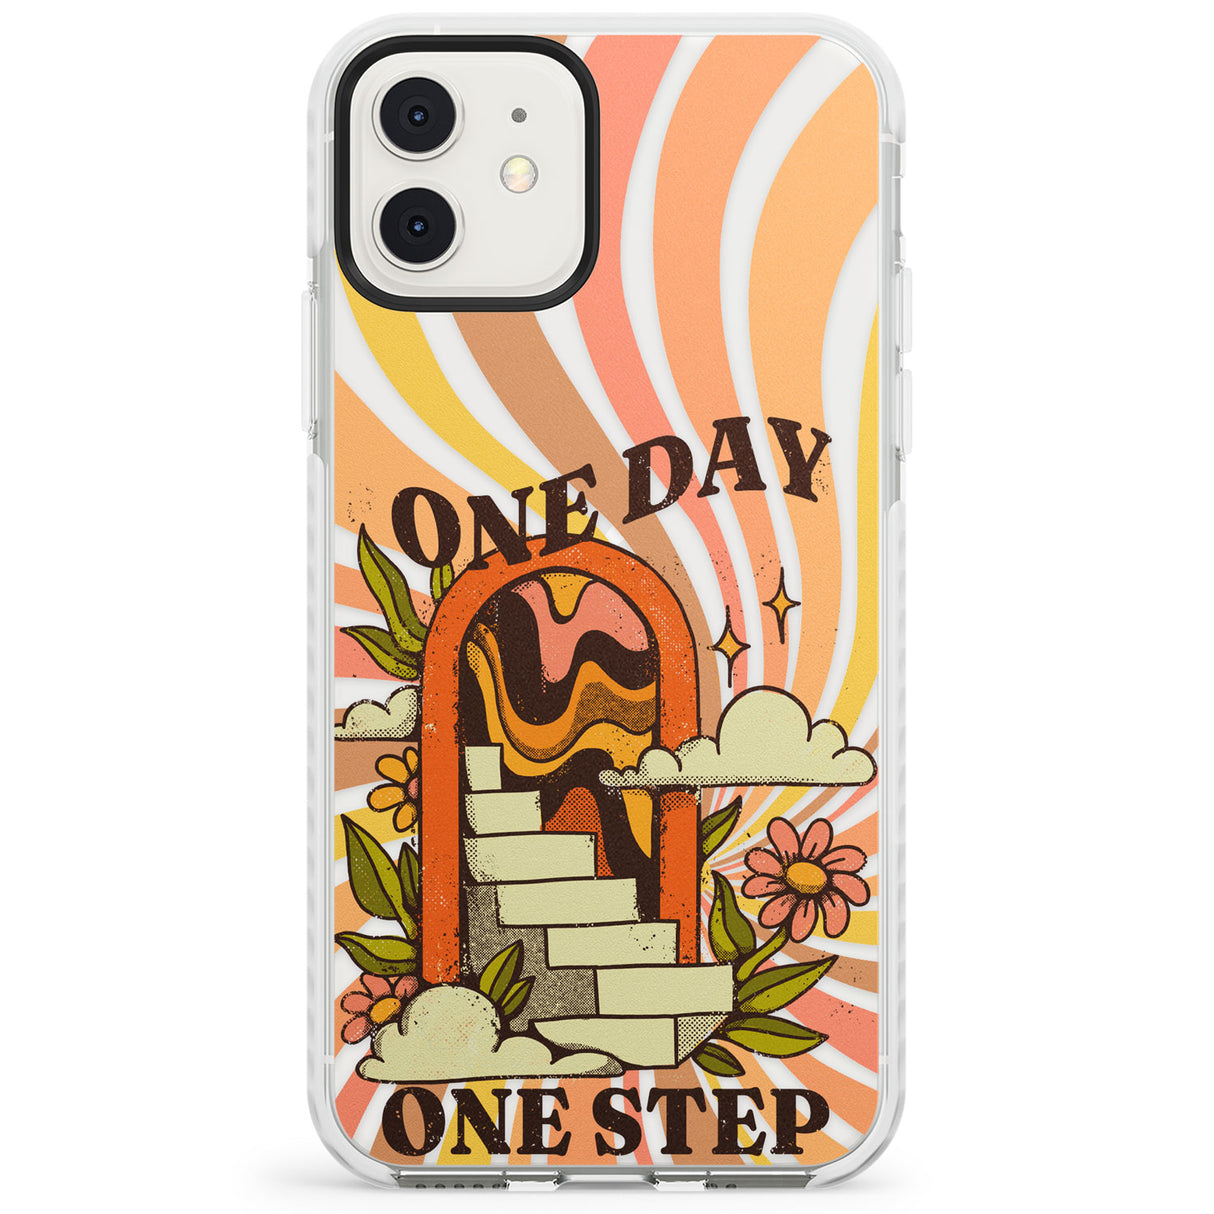 One Day One Step Impact Phone Case for iPhone 11, iphone 12